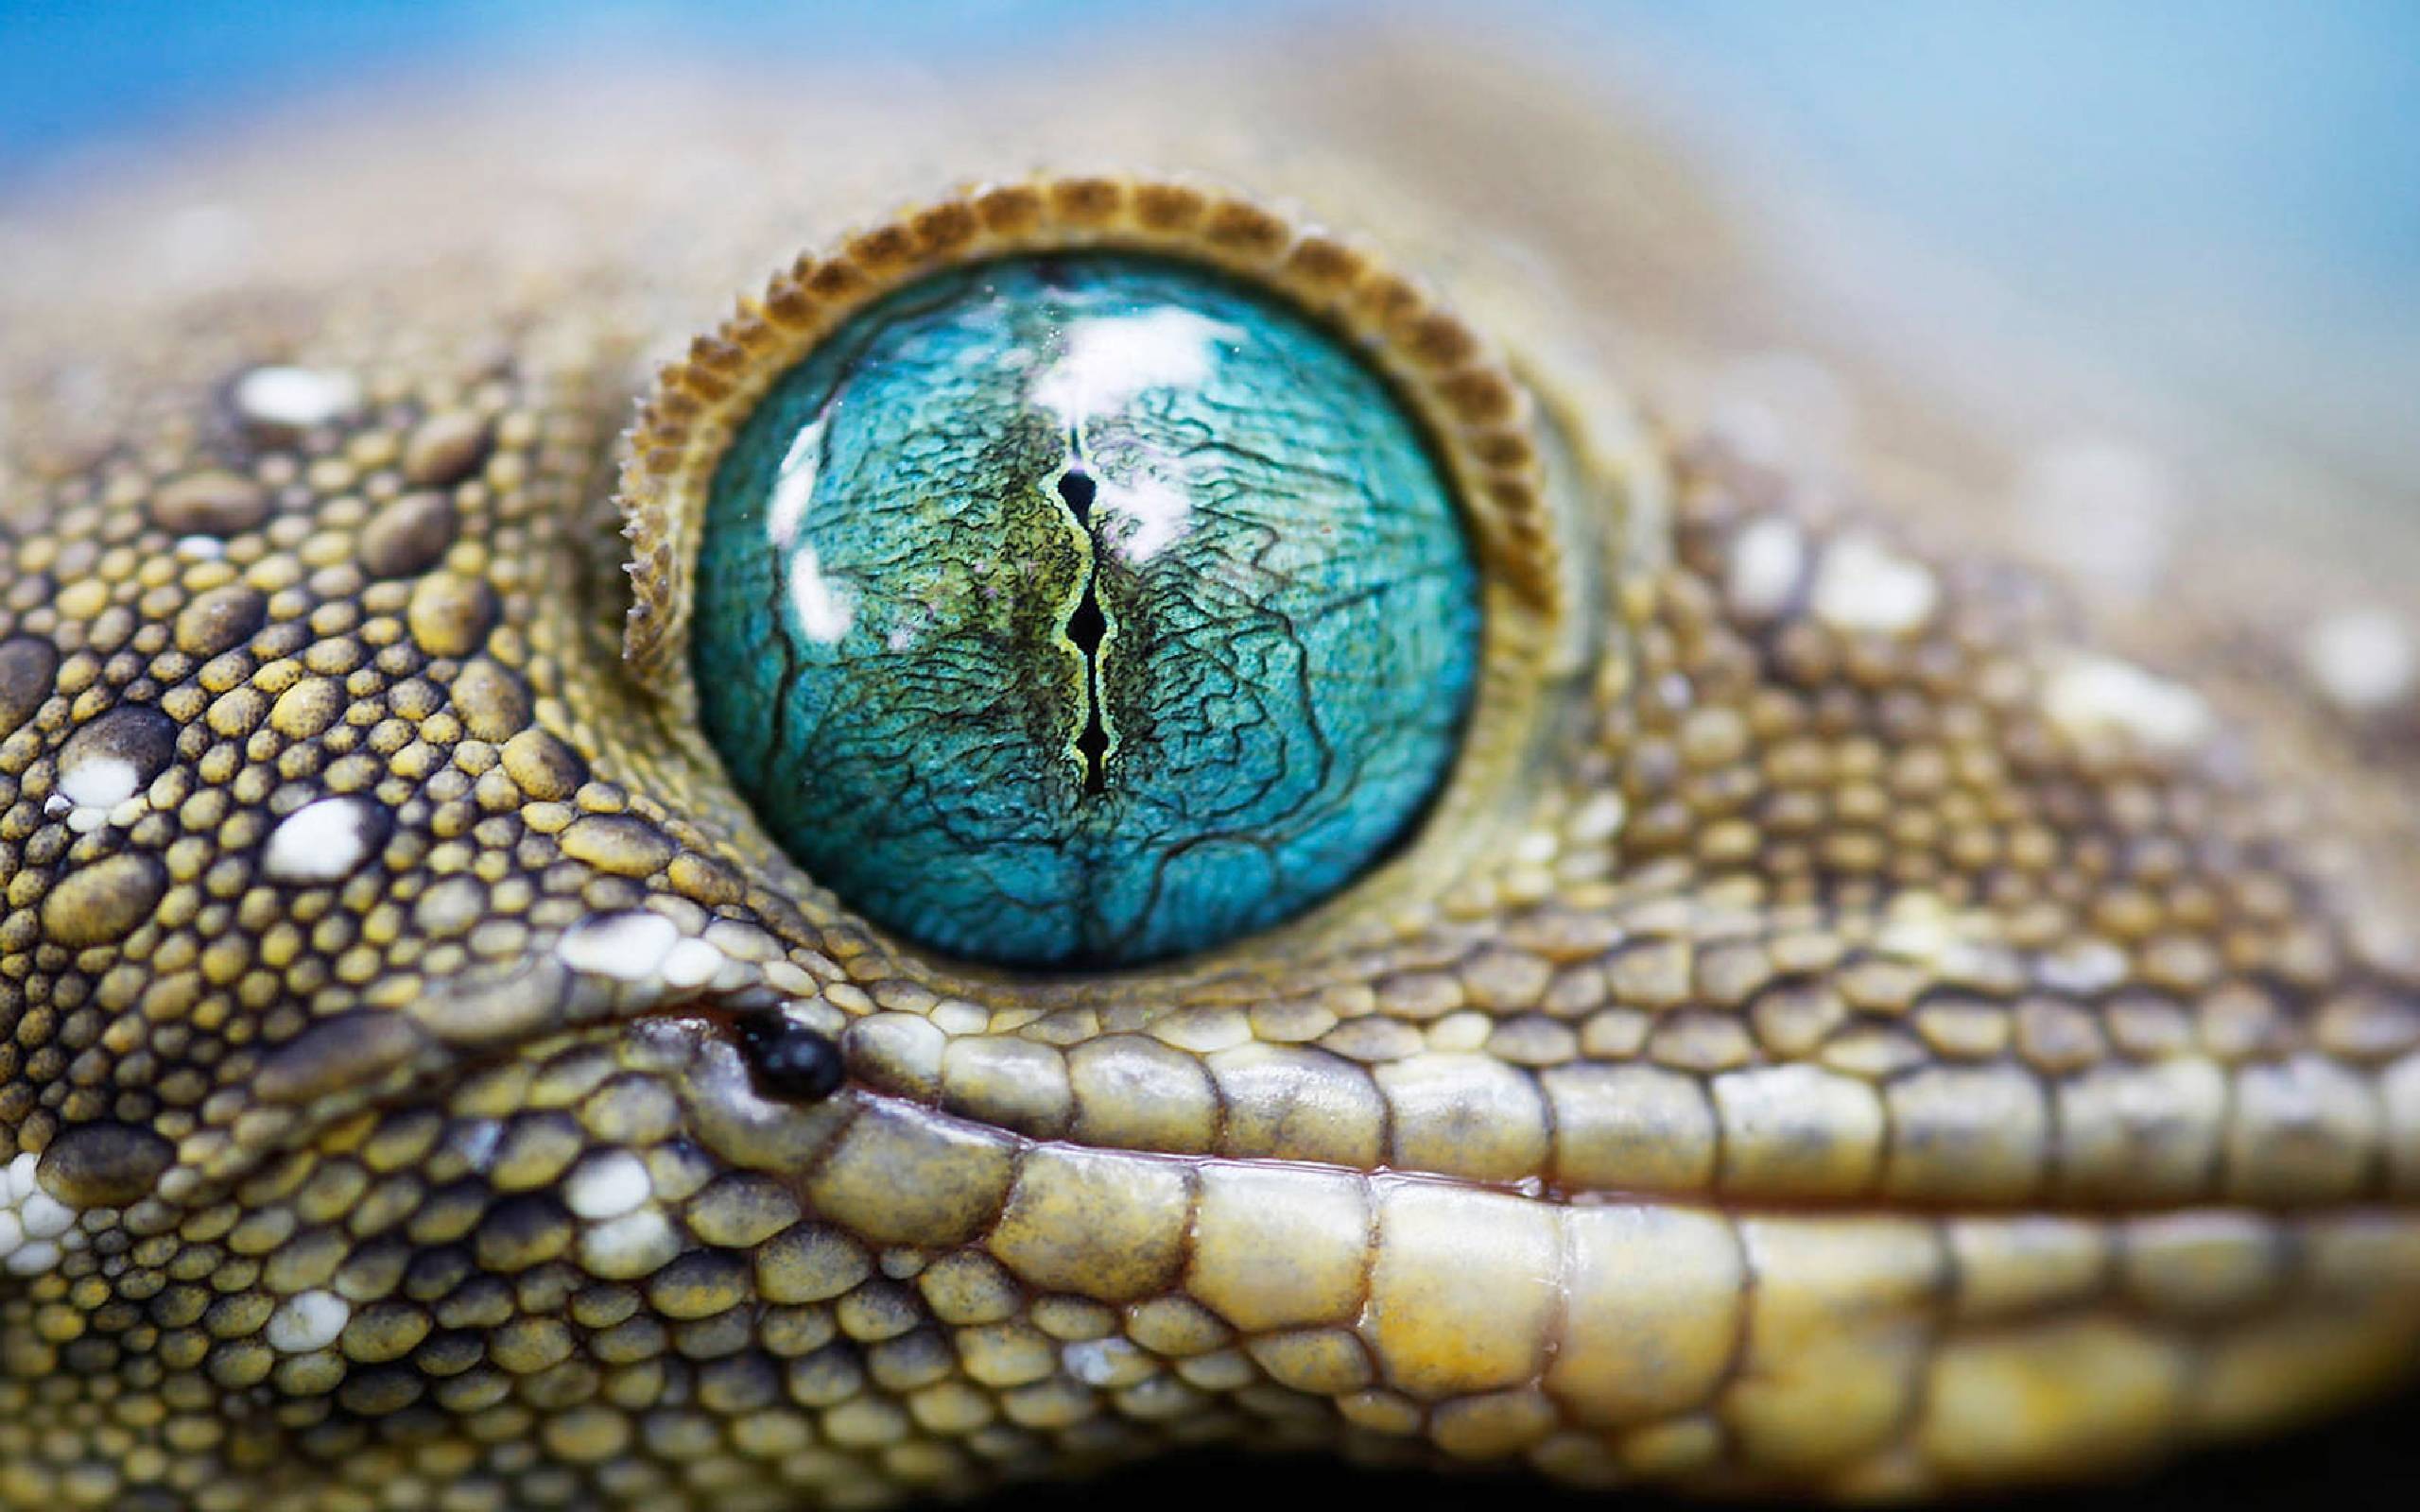 Download wallpaper 1350x2400 lizard reptile funny art iphone  876s6 for parallax hd background